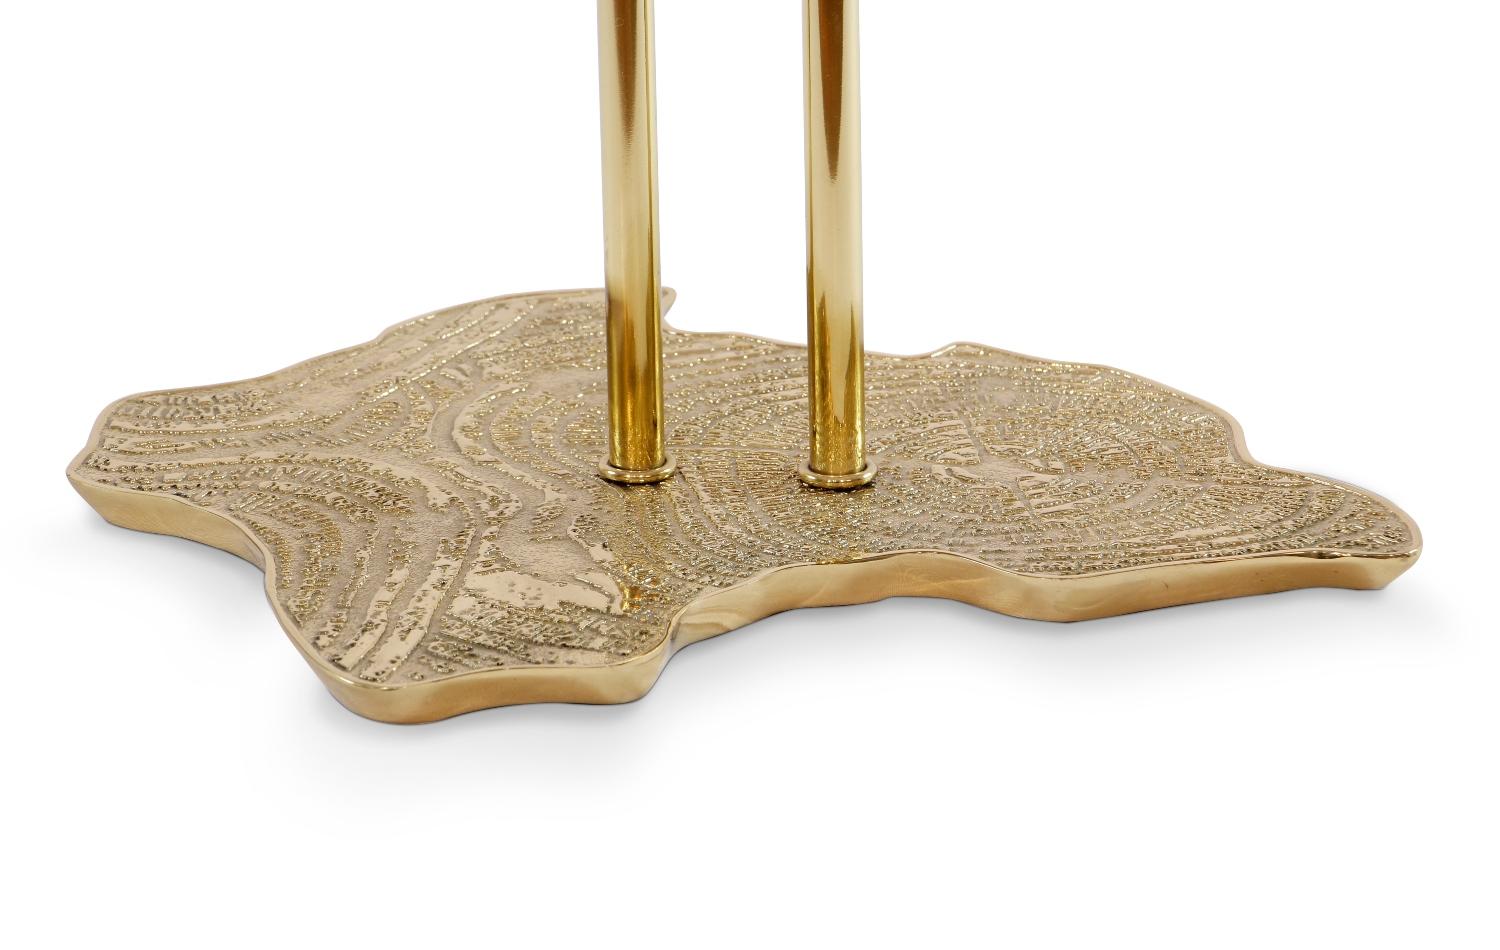 The mystic behind the name inspires Eden. This towel rack represents a part of the tree of knowledge and the tale of the birth of desire. Fully made of polished casted brass, with a base delicately engraved on the top exposing the heart of a golden